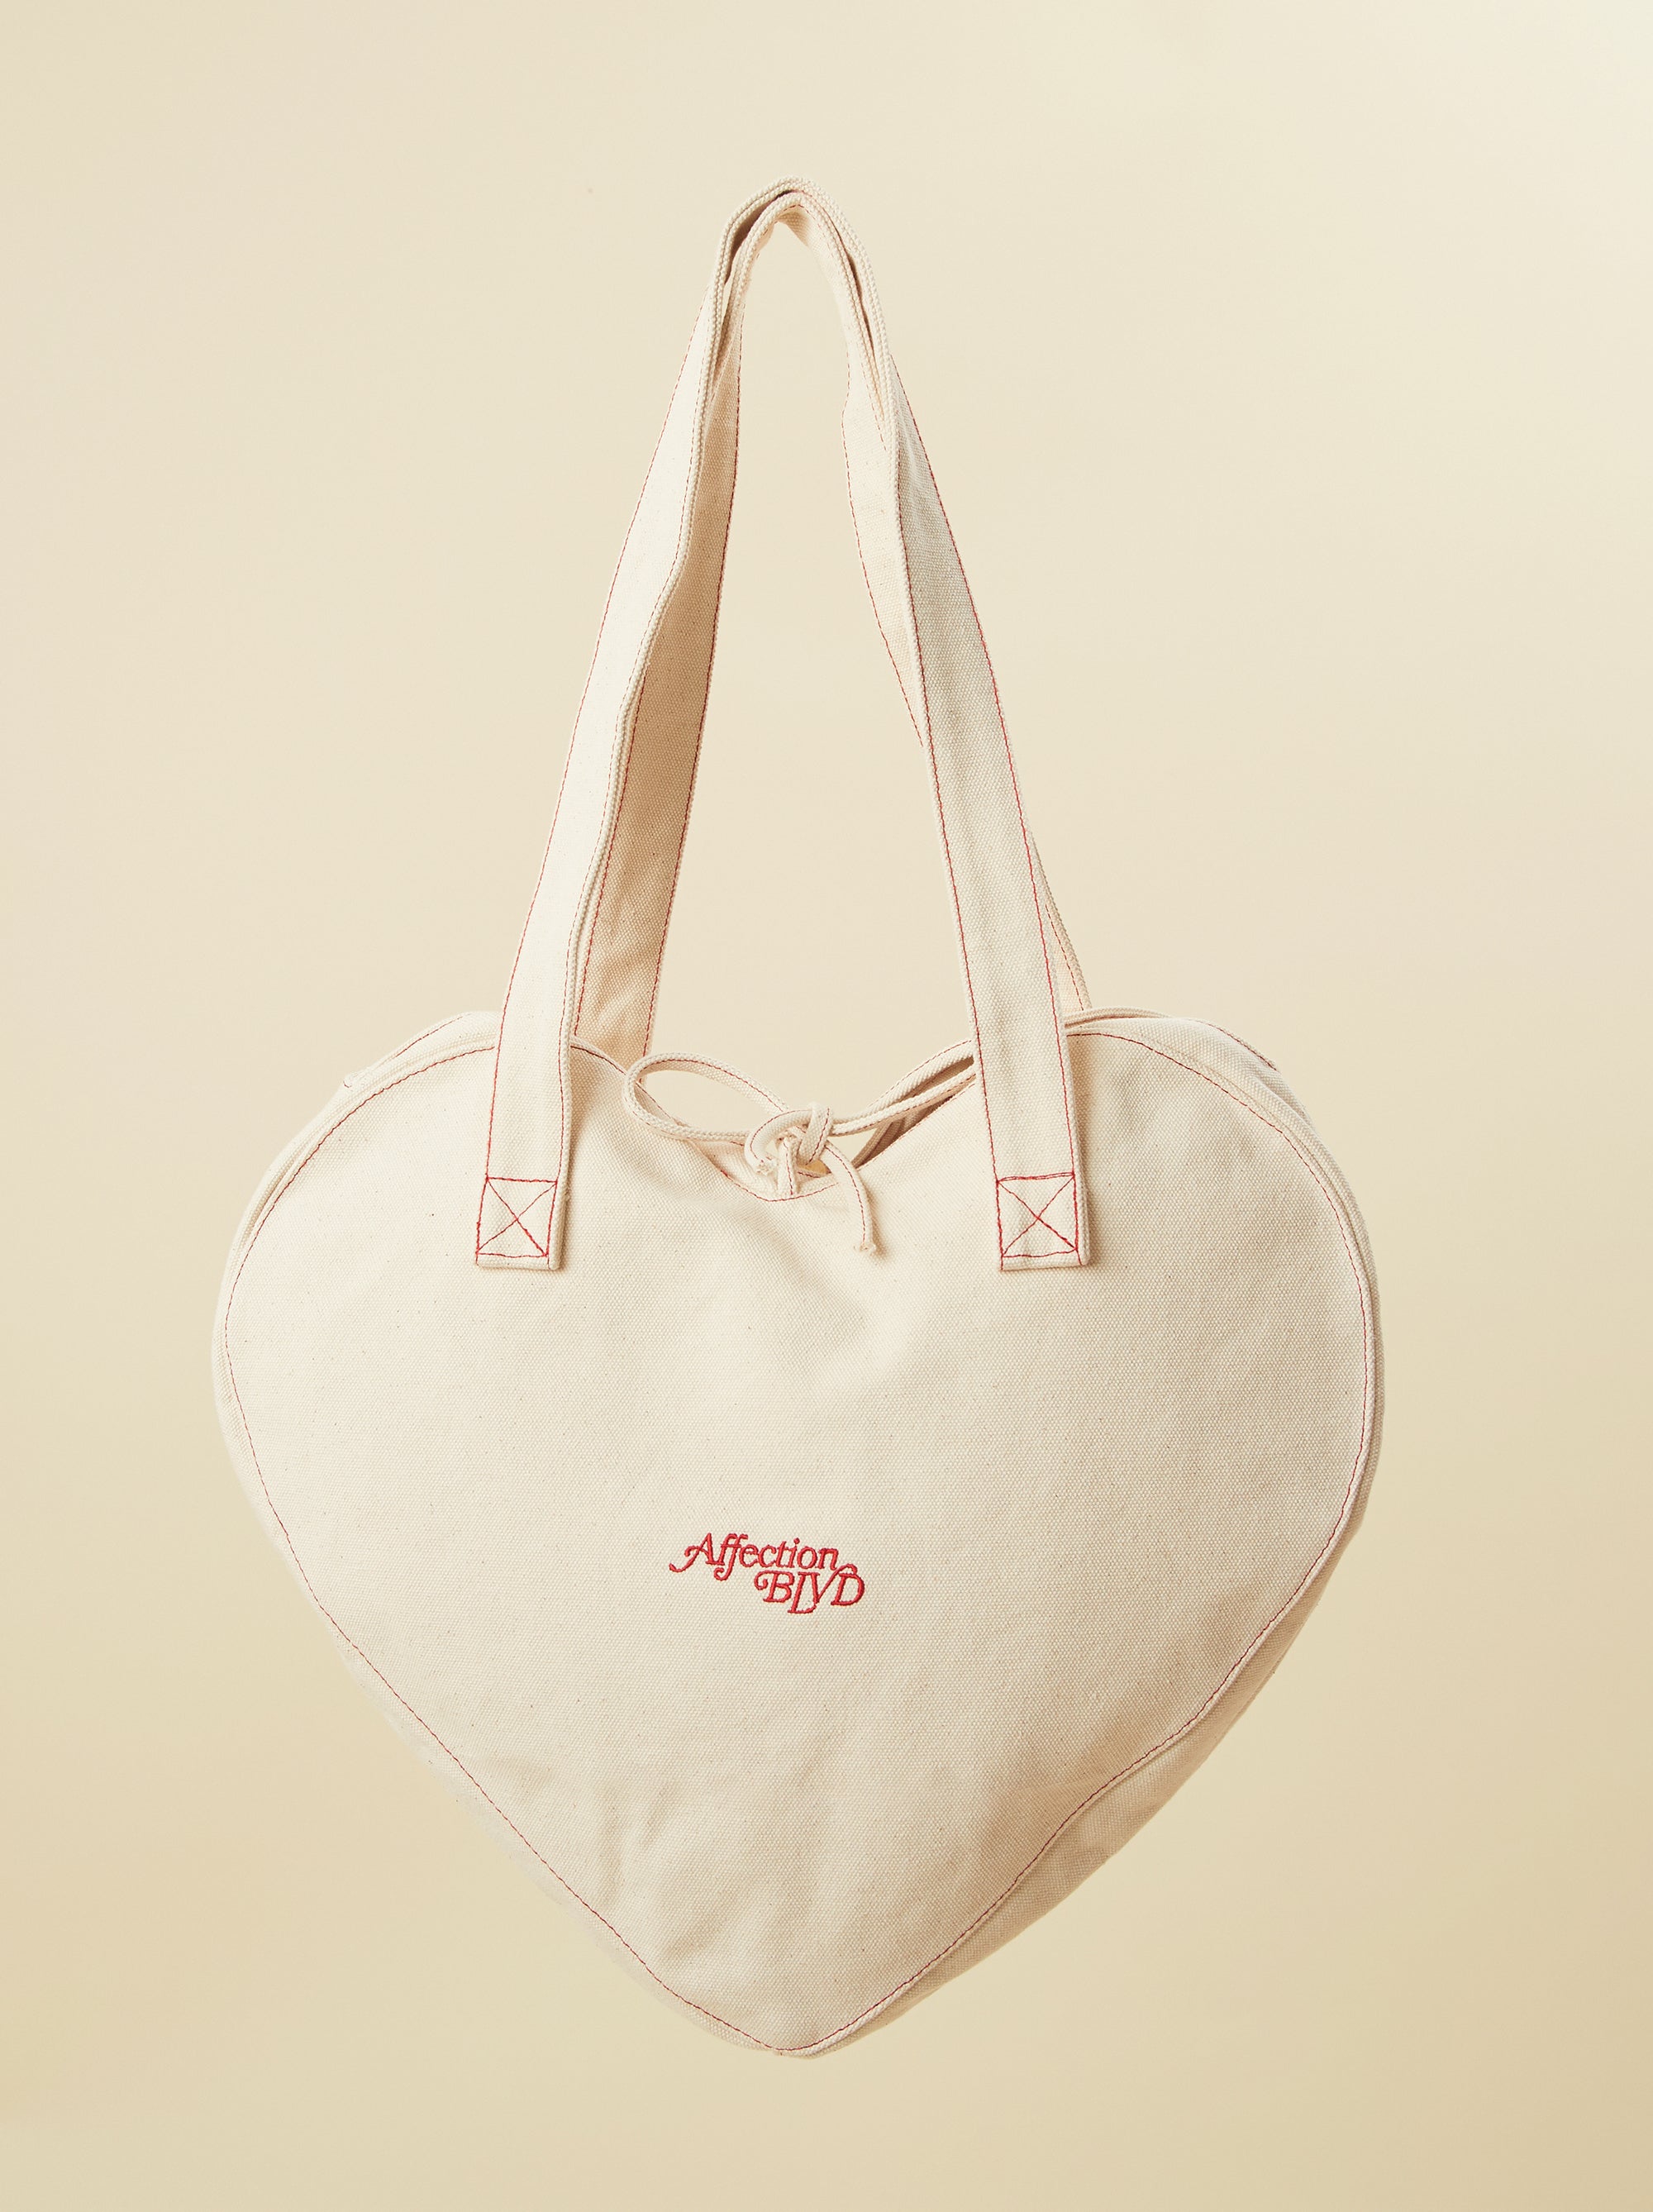 Go With Your Heart Bag